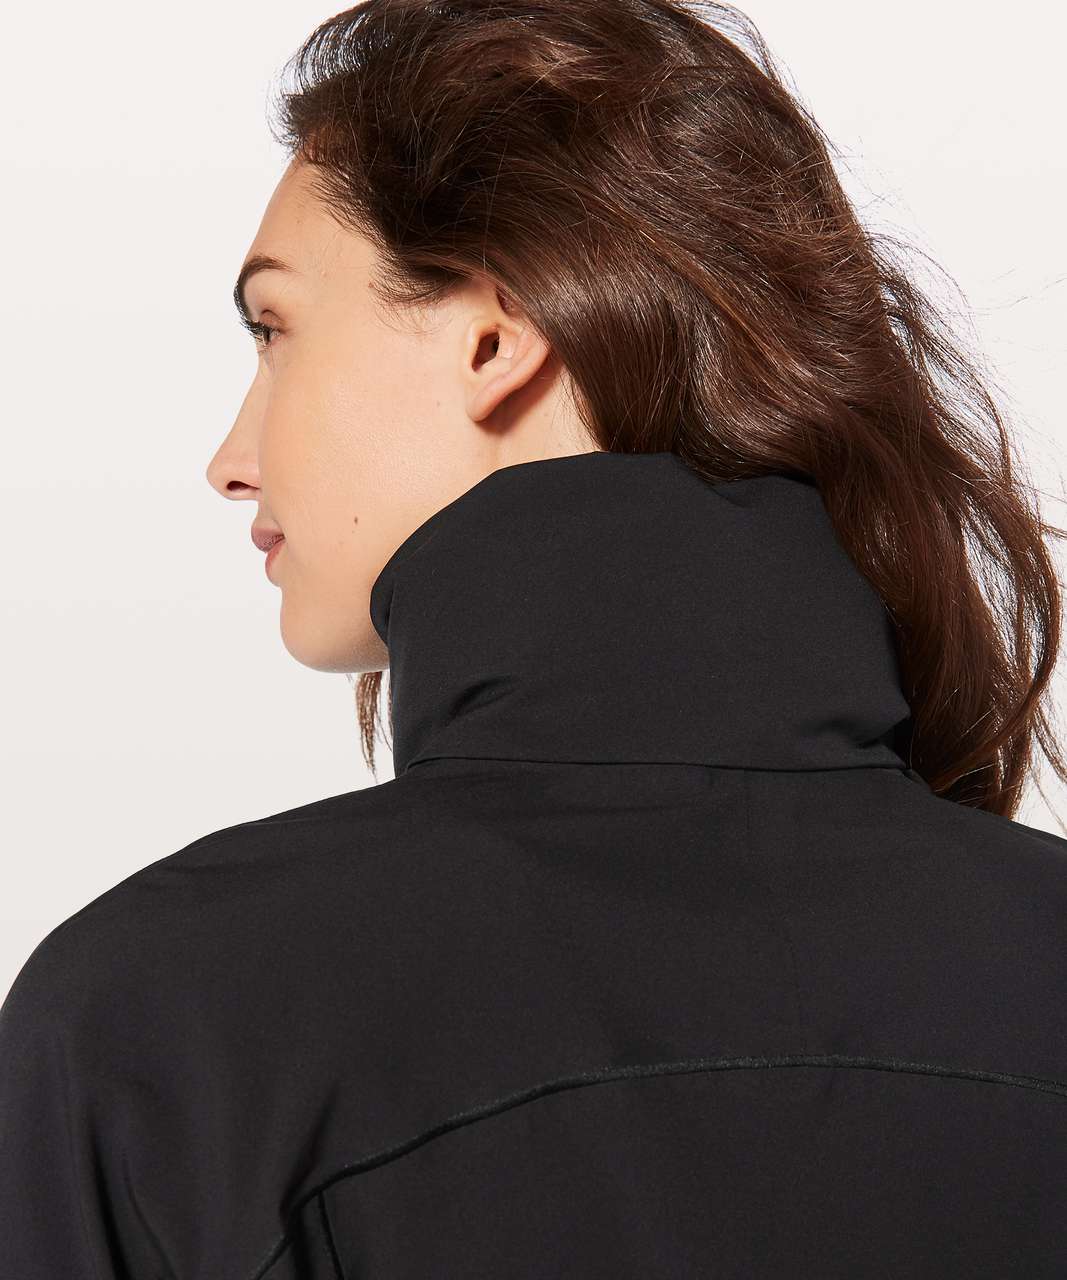 Lululemon Here To Move Jacket - Black (First Release)